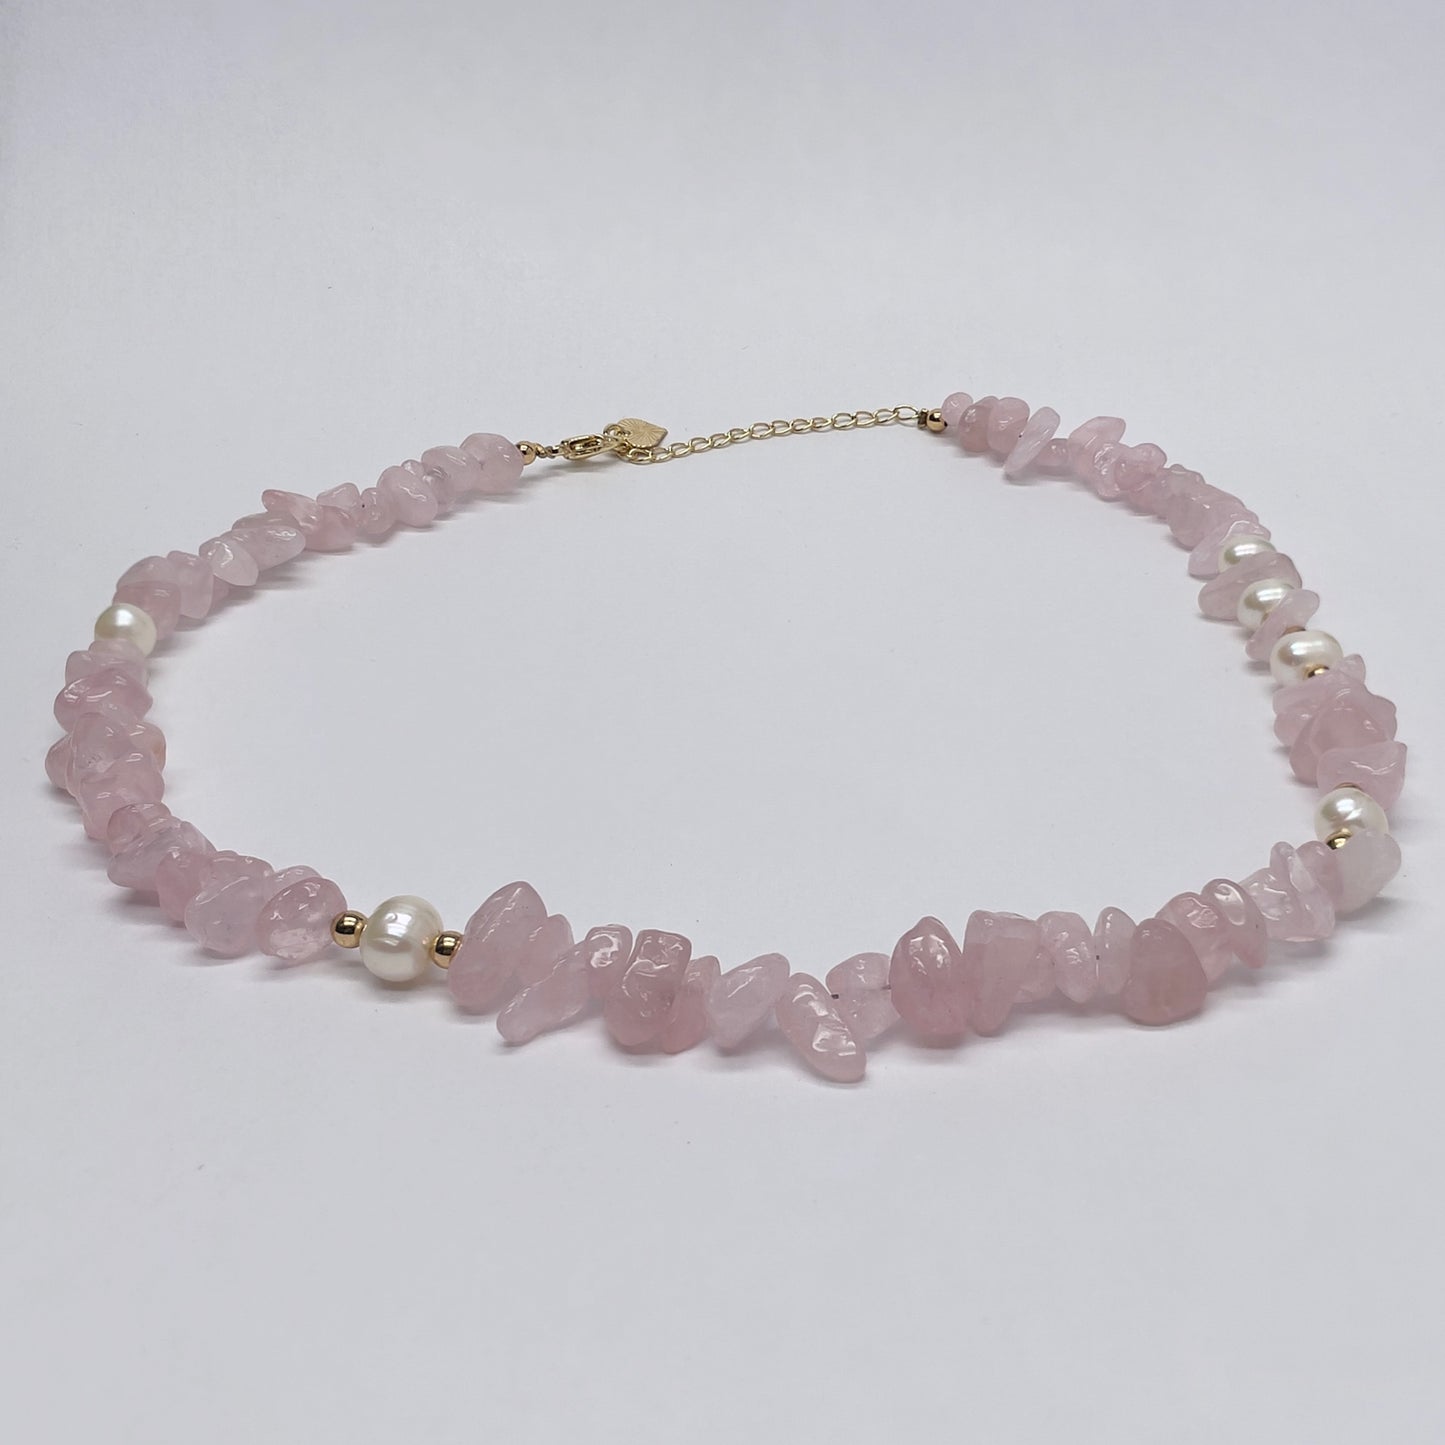 Stonelry Rose Quartz and Pearls Necklace